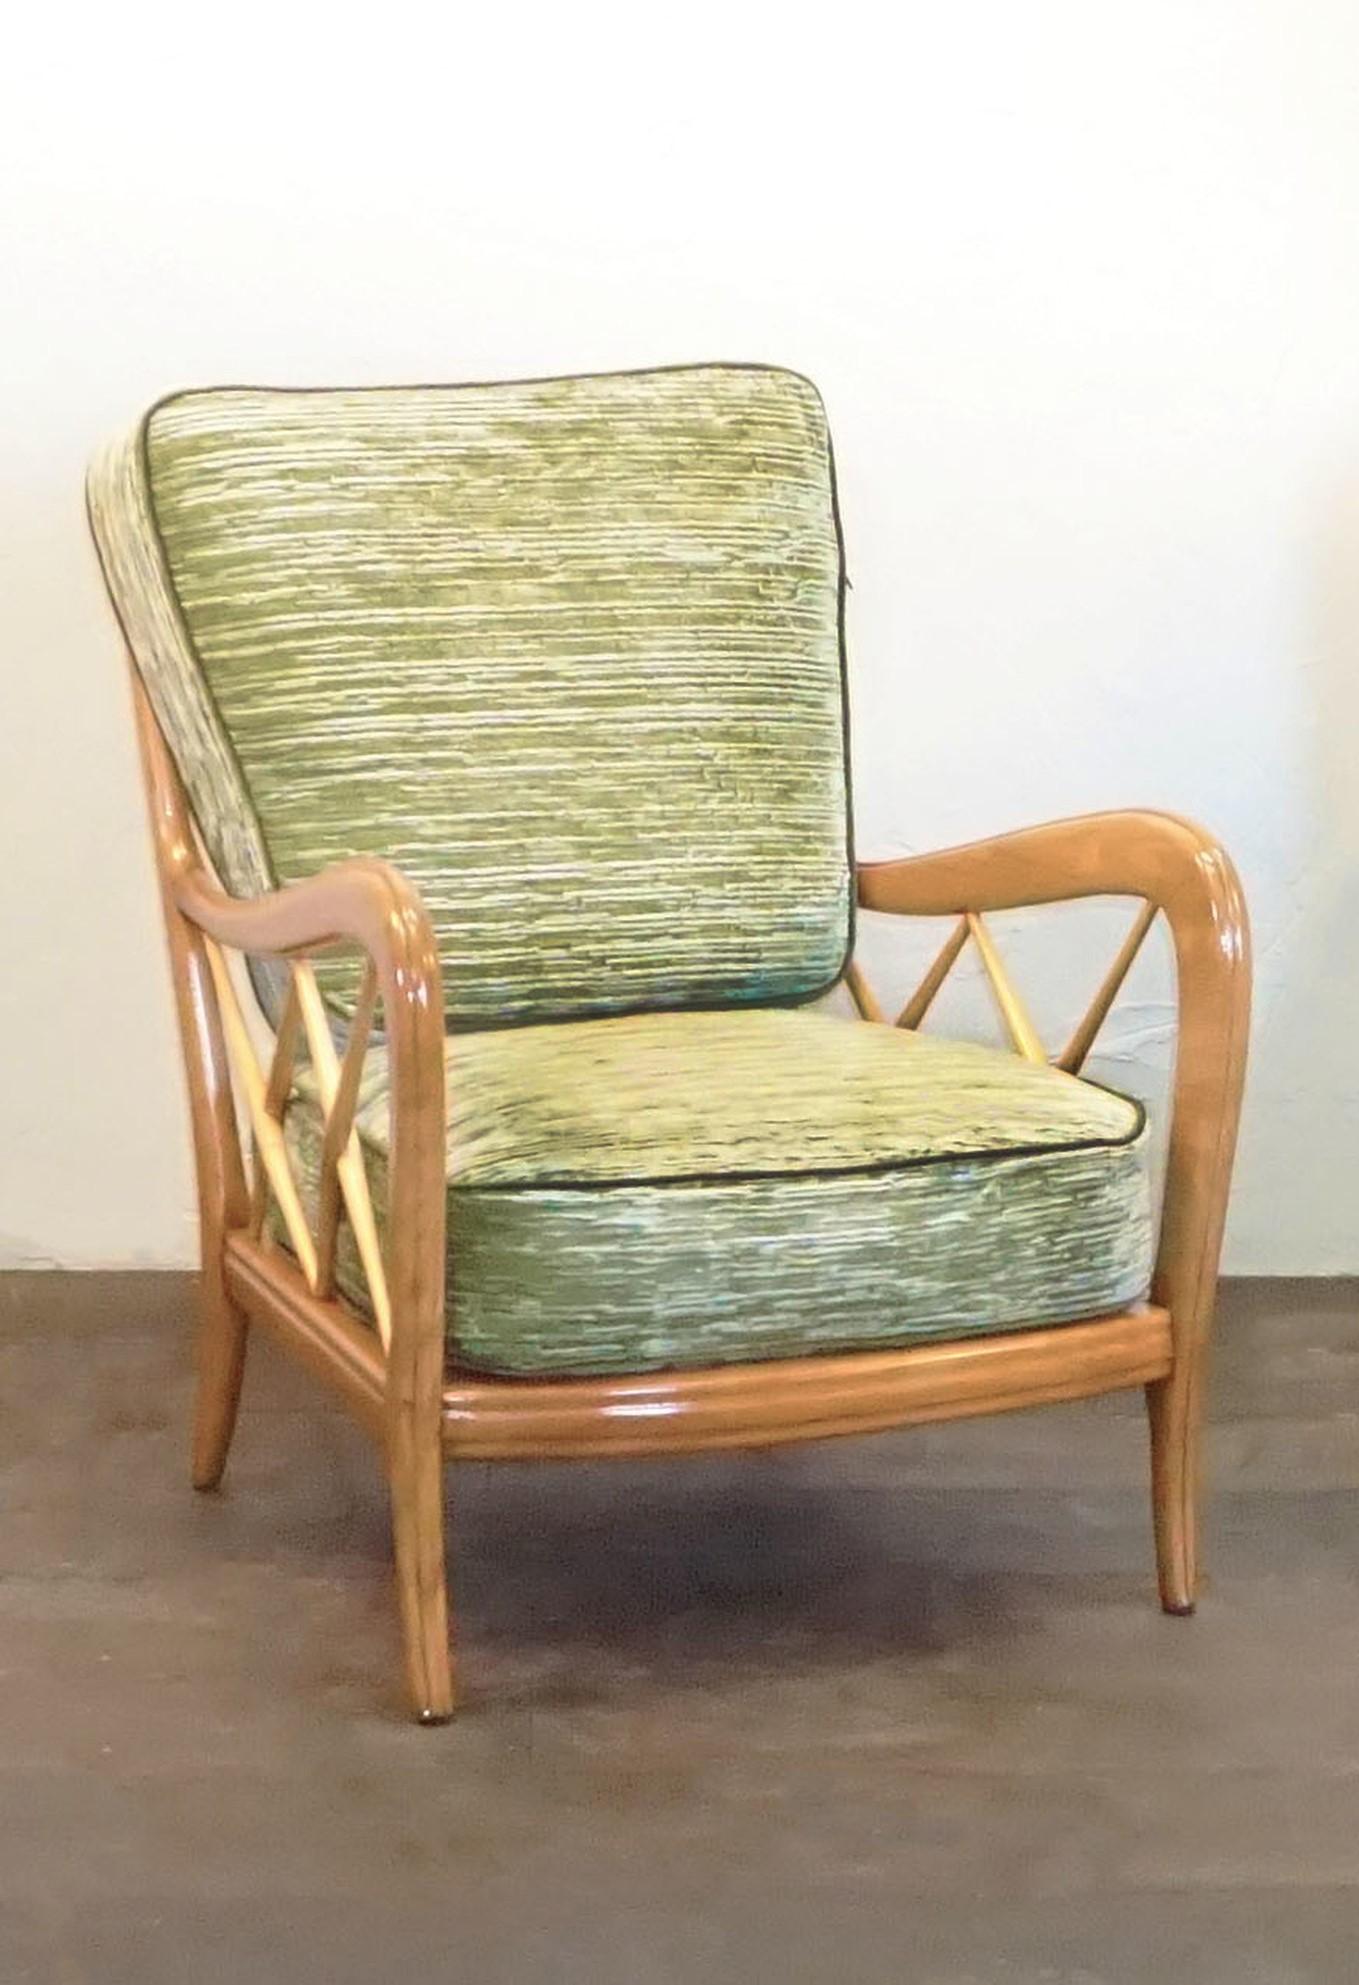 A vintage Mid-Century Modern Italian pair of lounge chairs made of walnut and green velvet fabric. Designed by Paolo Buffa in good condition. Wear consistent with age and use, circa 1950, Milan, Italy.

Seat: 16” H x 20